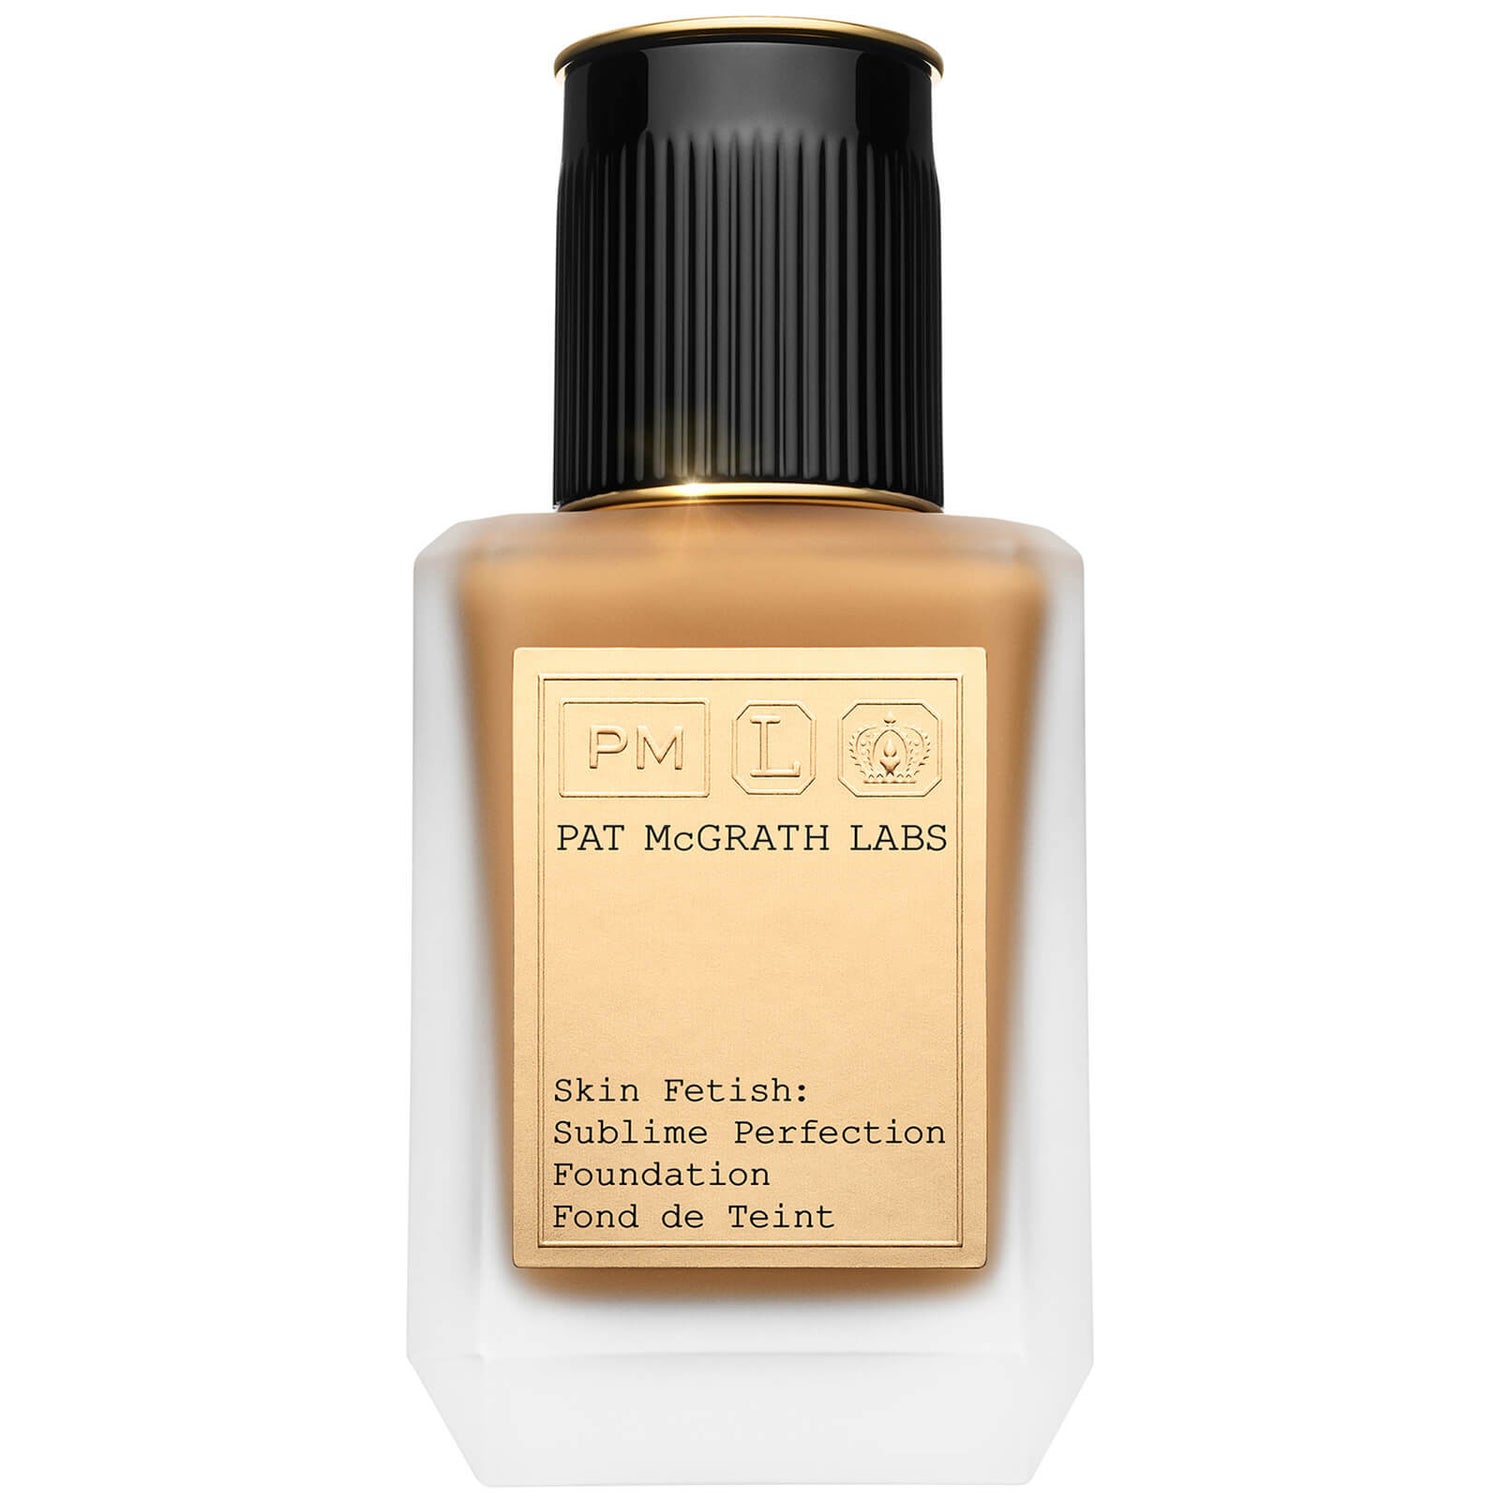 Pat McGrath Labs Skin Fetish Sublime Perfection Foundation 35ml (Various Shades)